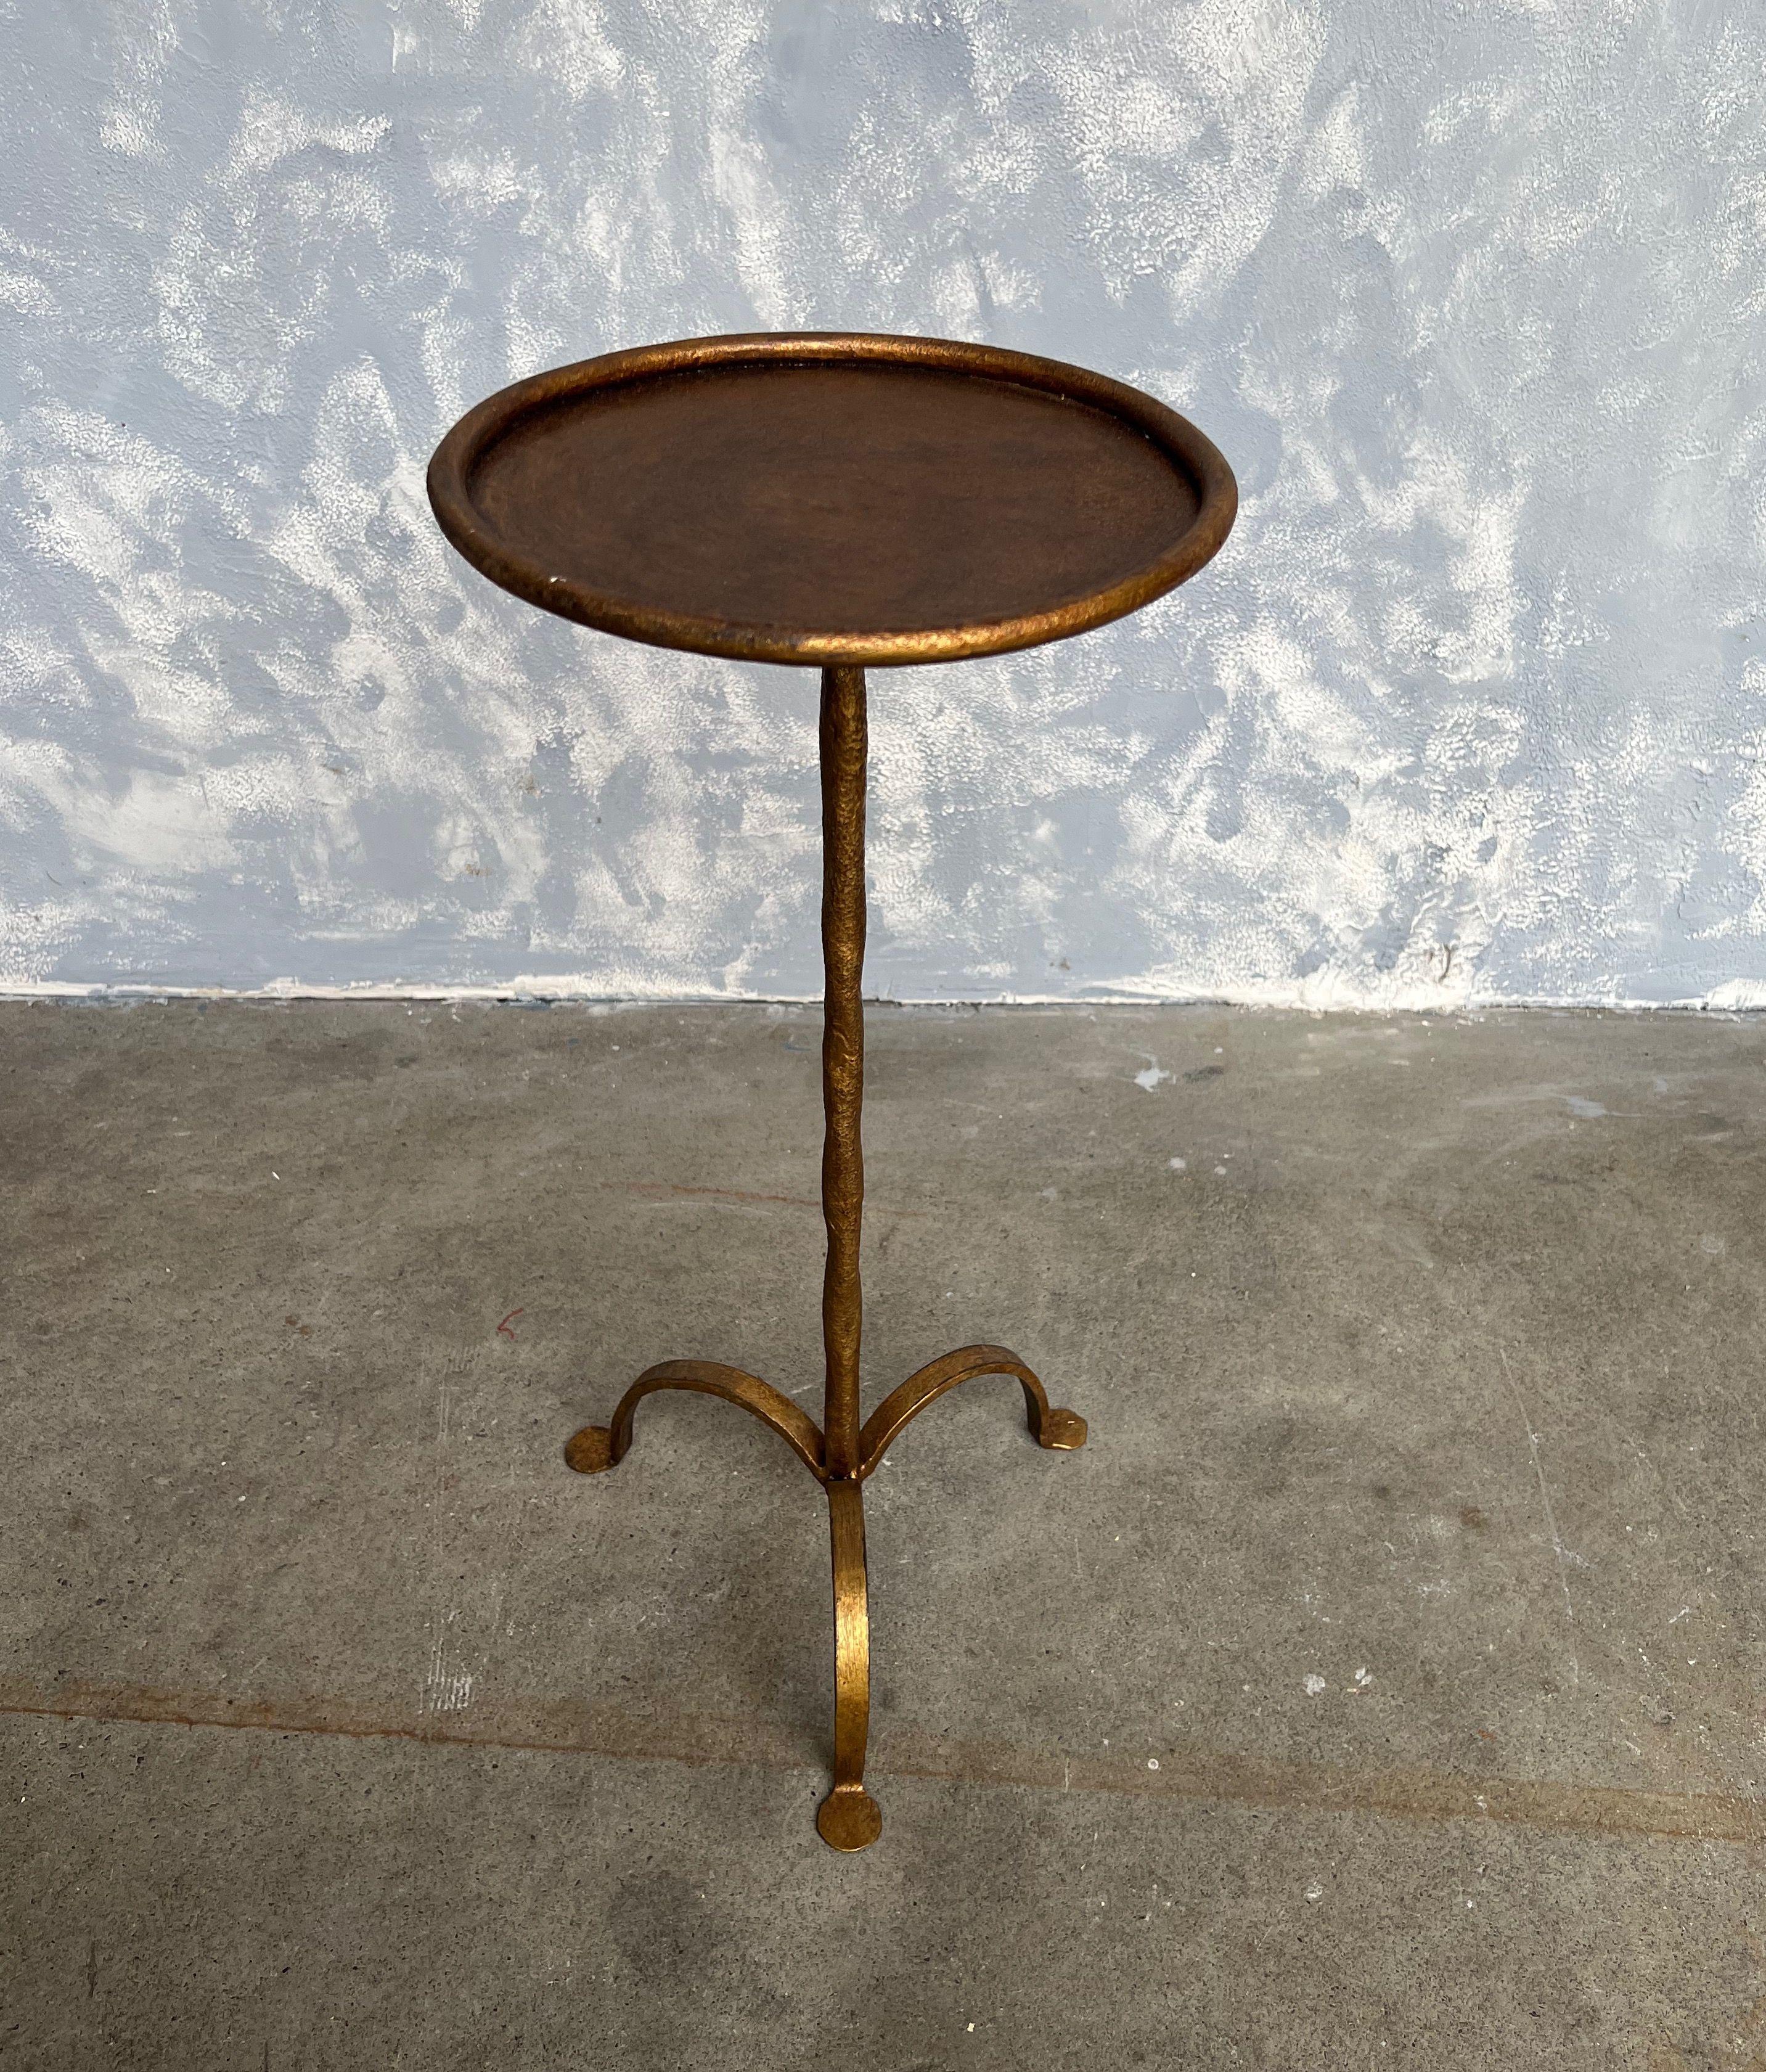 Small gilt iron and metal end table with a hand forged stem. Perfect for a drink, it can easily be moved around as needed. The original finish shows several under layers of black and red making for a rich patina.

Spanish, 1950s. Very good vintage